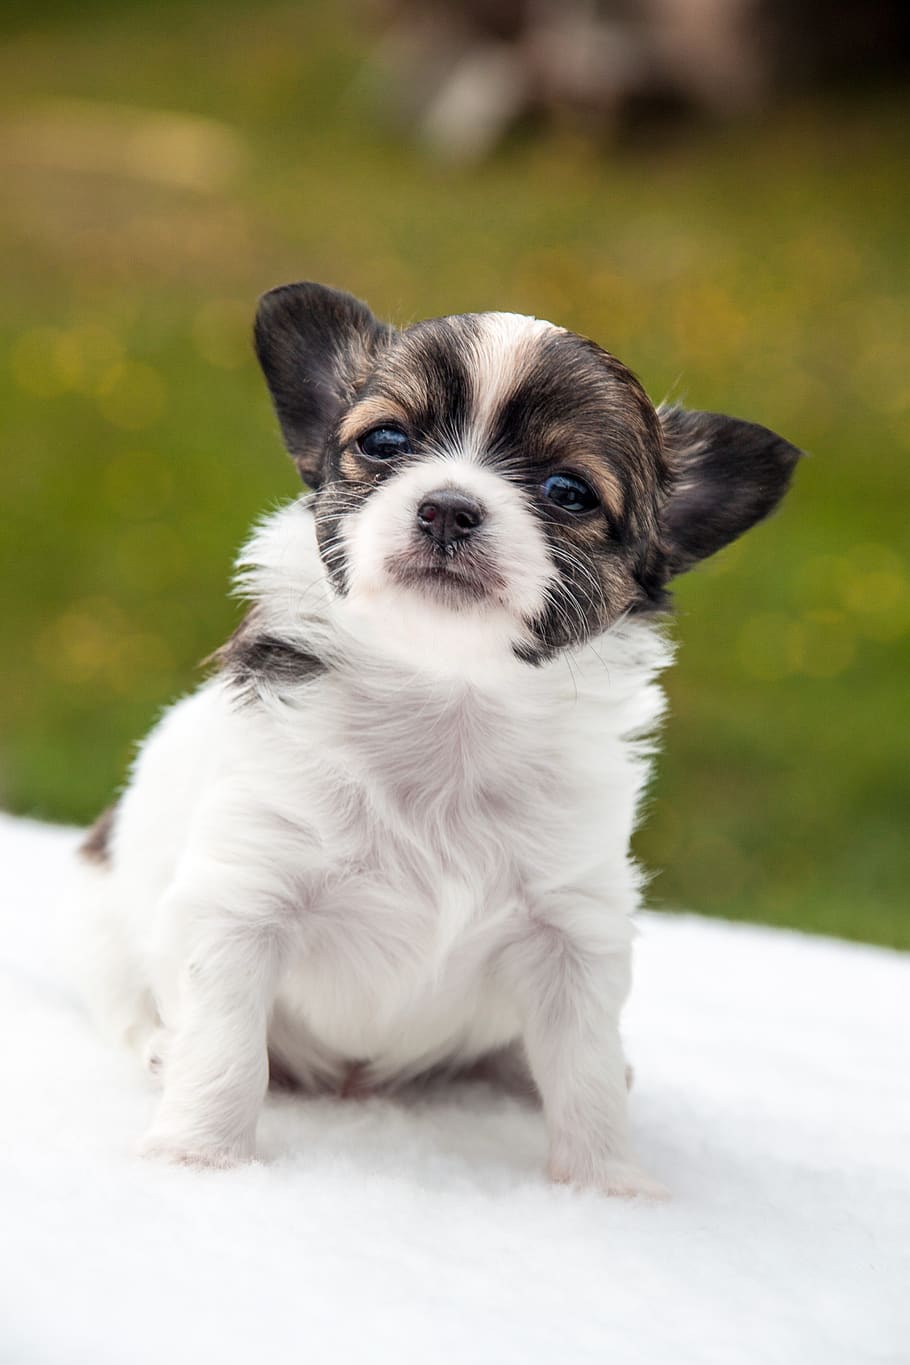 chihuahua, puppy, animals, dogs, pet, cute, one animal, domestic, pets, canine